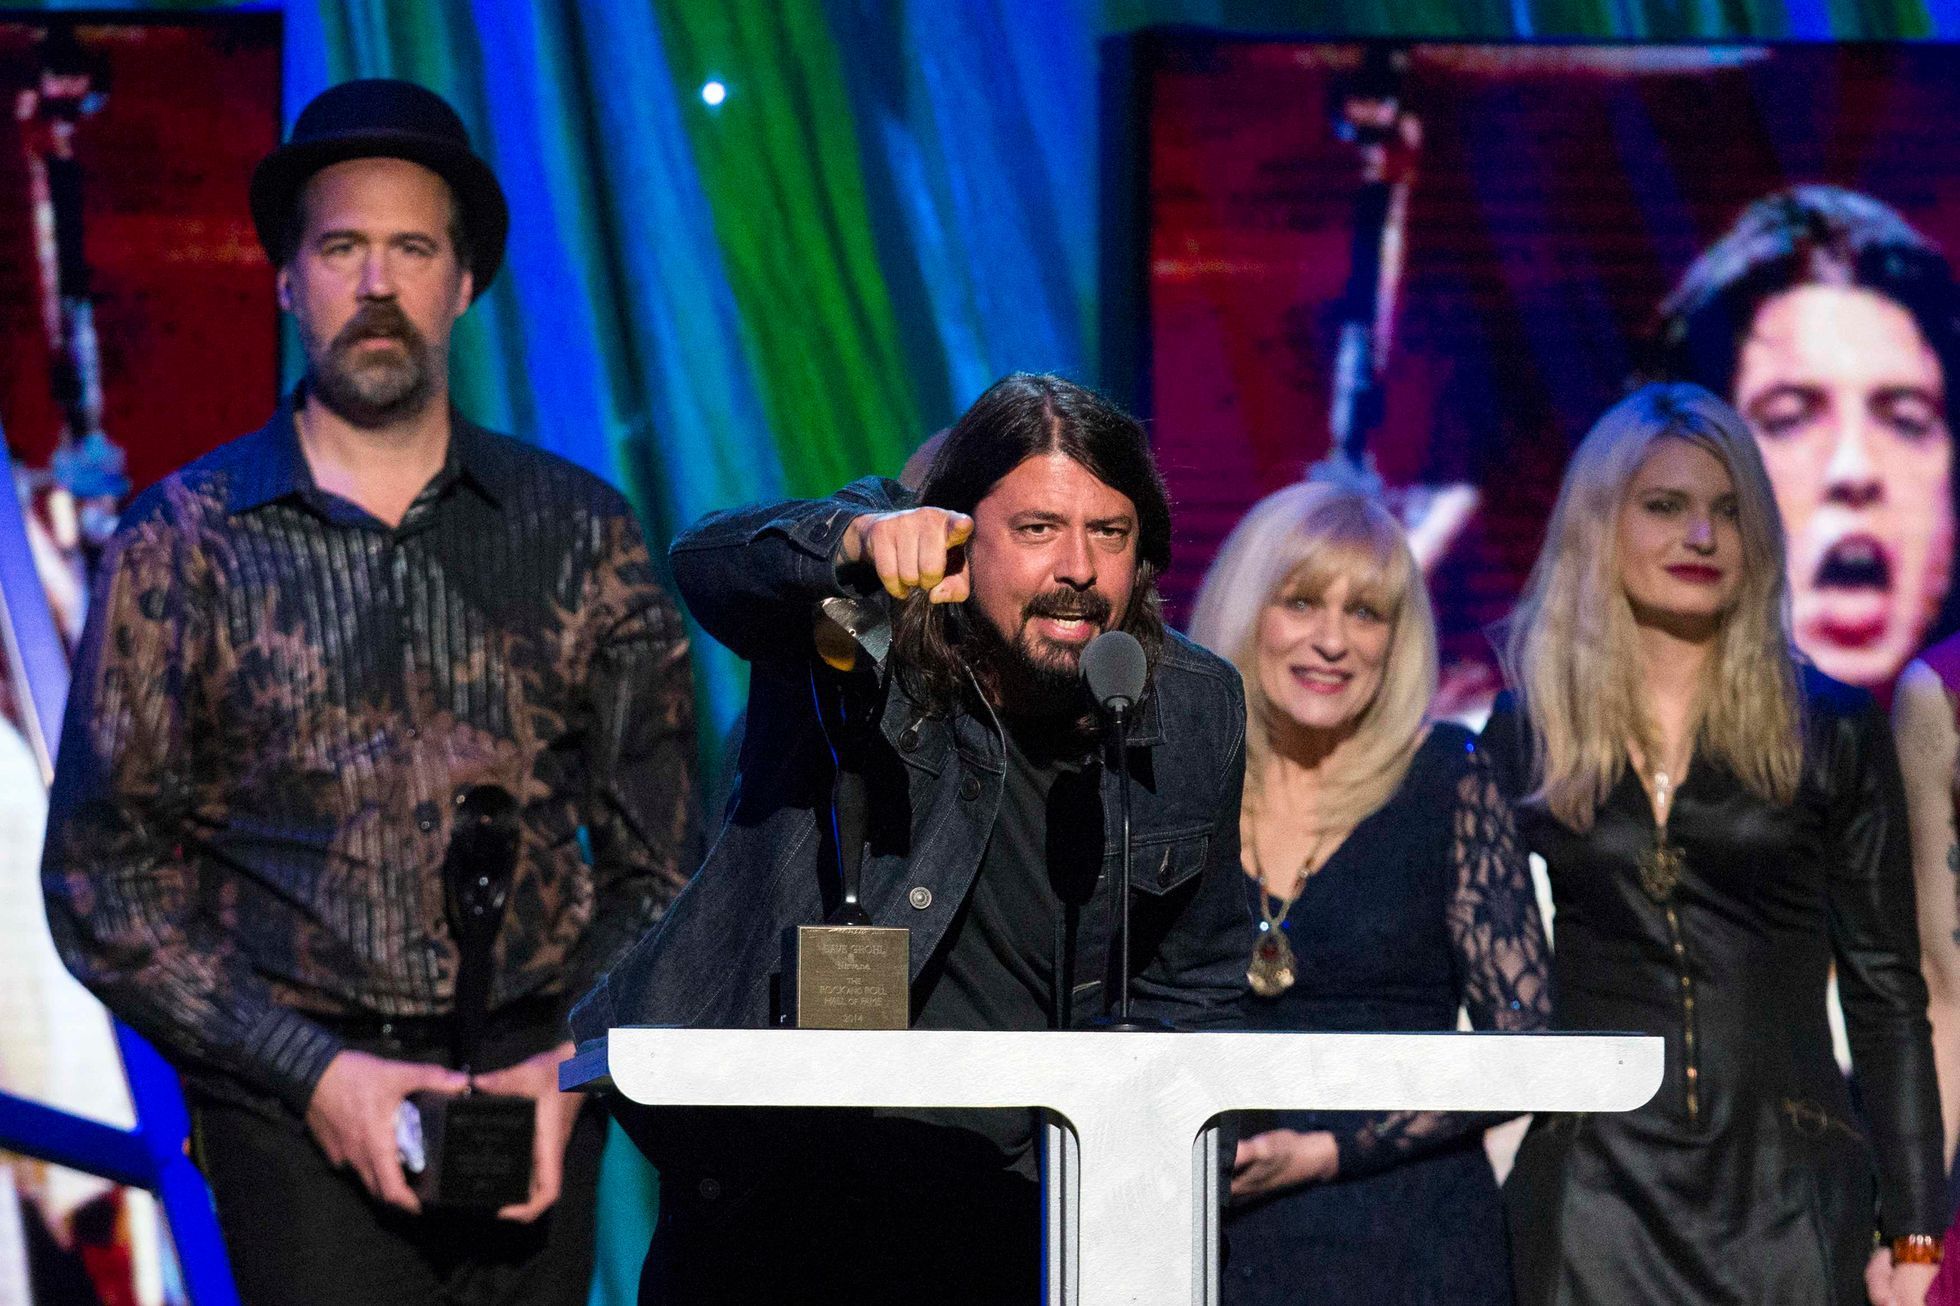 Drummer Grohl of Nirvana speaks in front of Novoselic after band was inducted during 29th annual Rock and Roll Hall of Fame Induction Ceremony in Brooklyn, New York